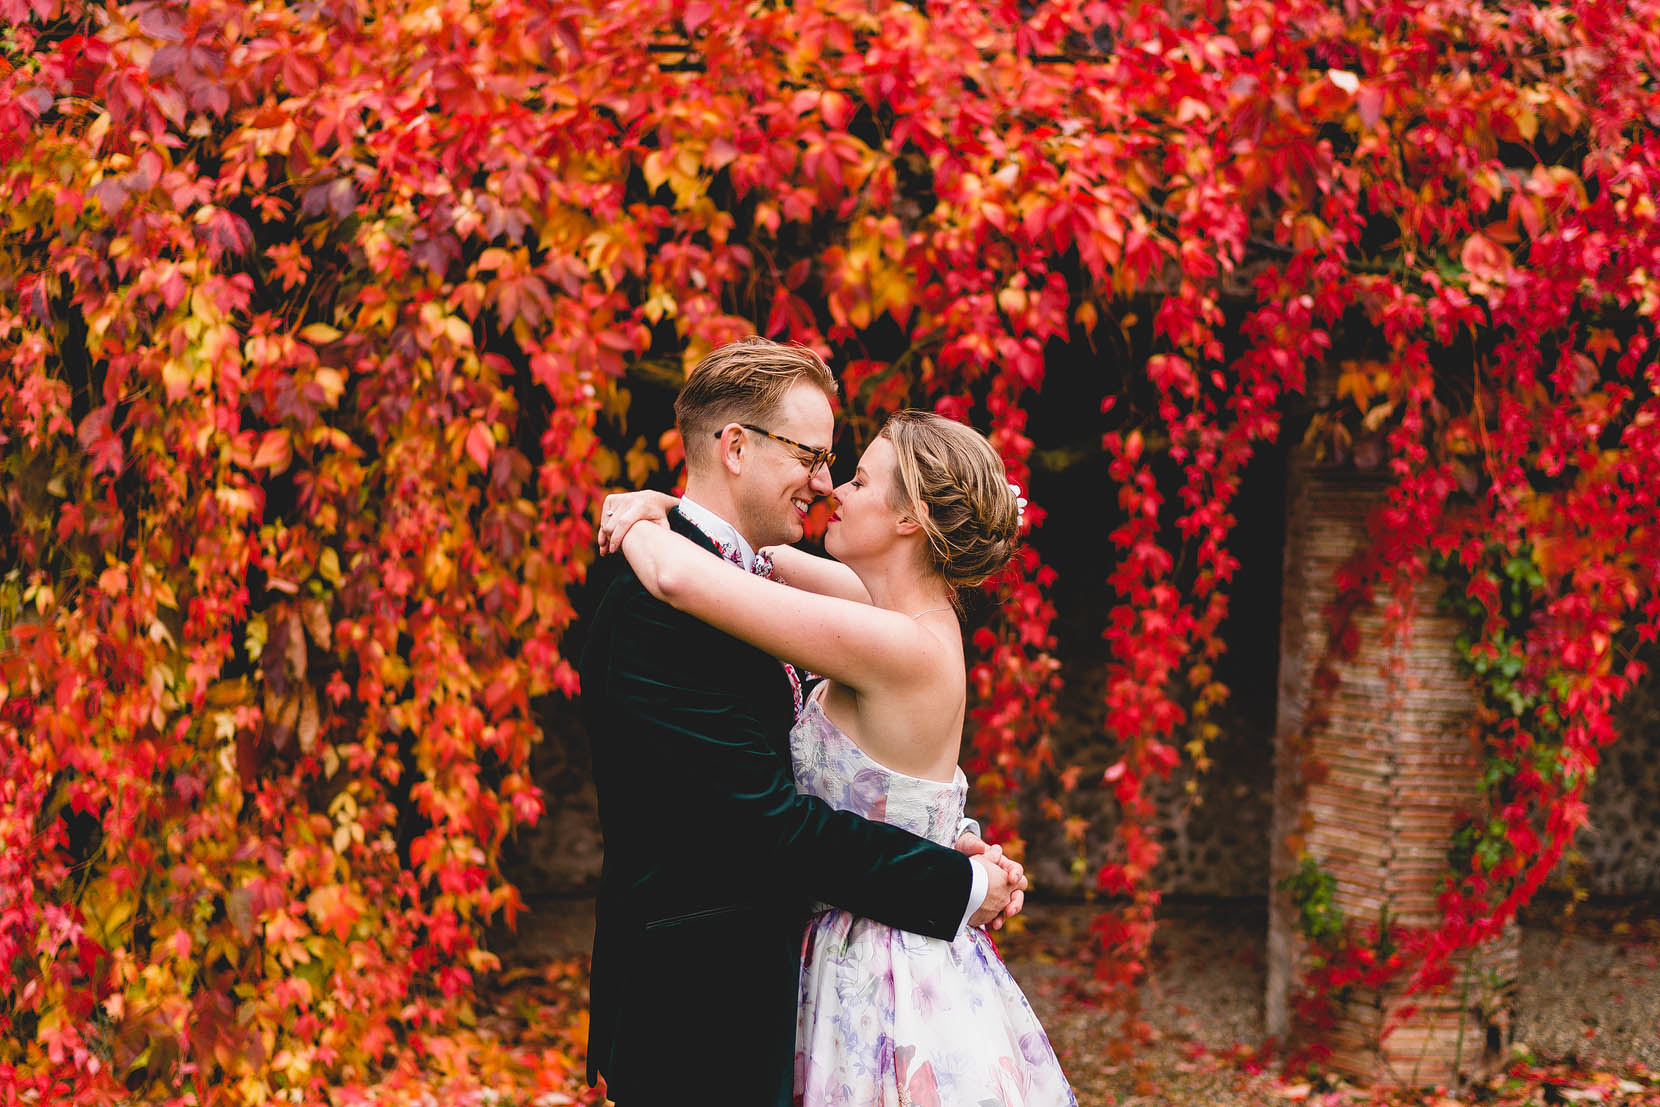 Wedding Photography at Norfolks Voewood infront of a fire red autumnal leafy backdrop